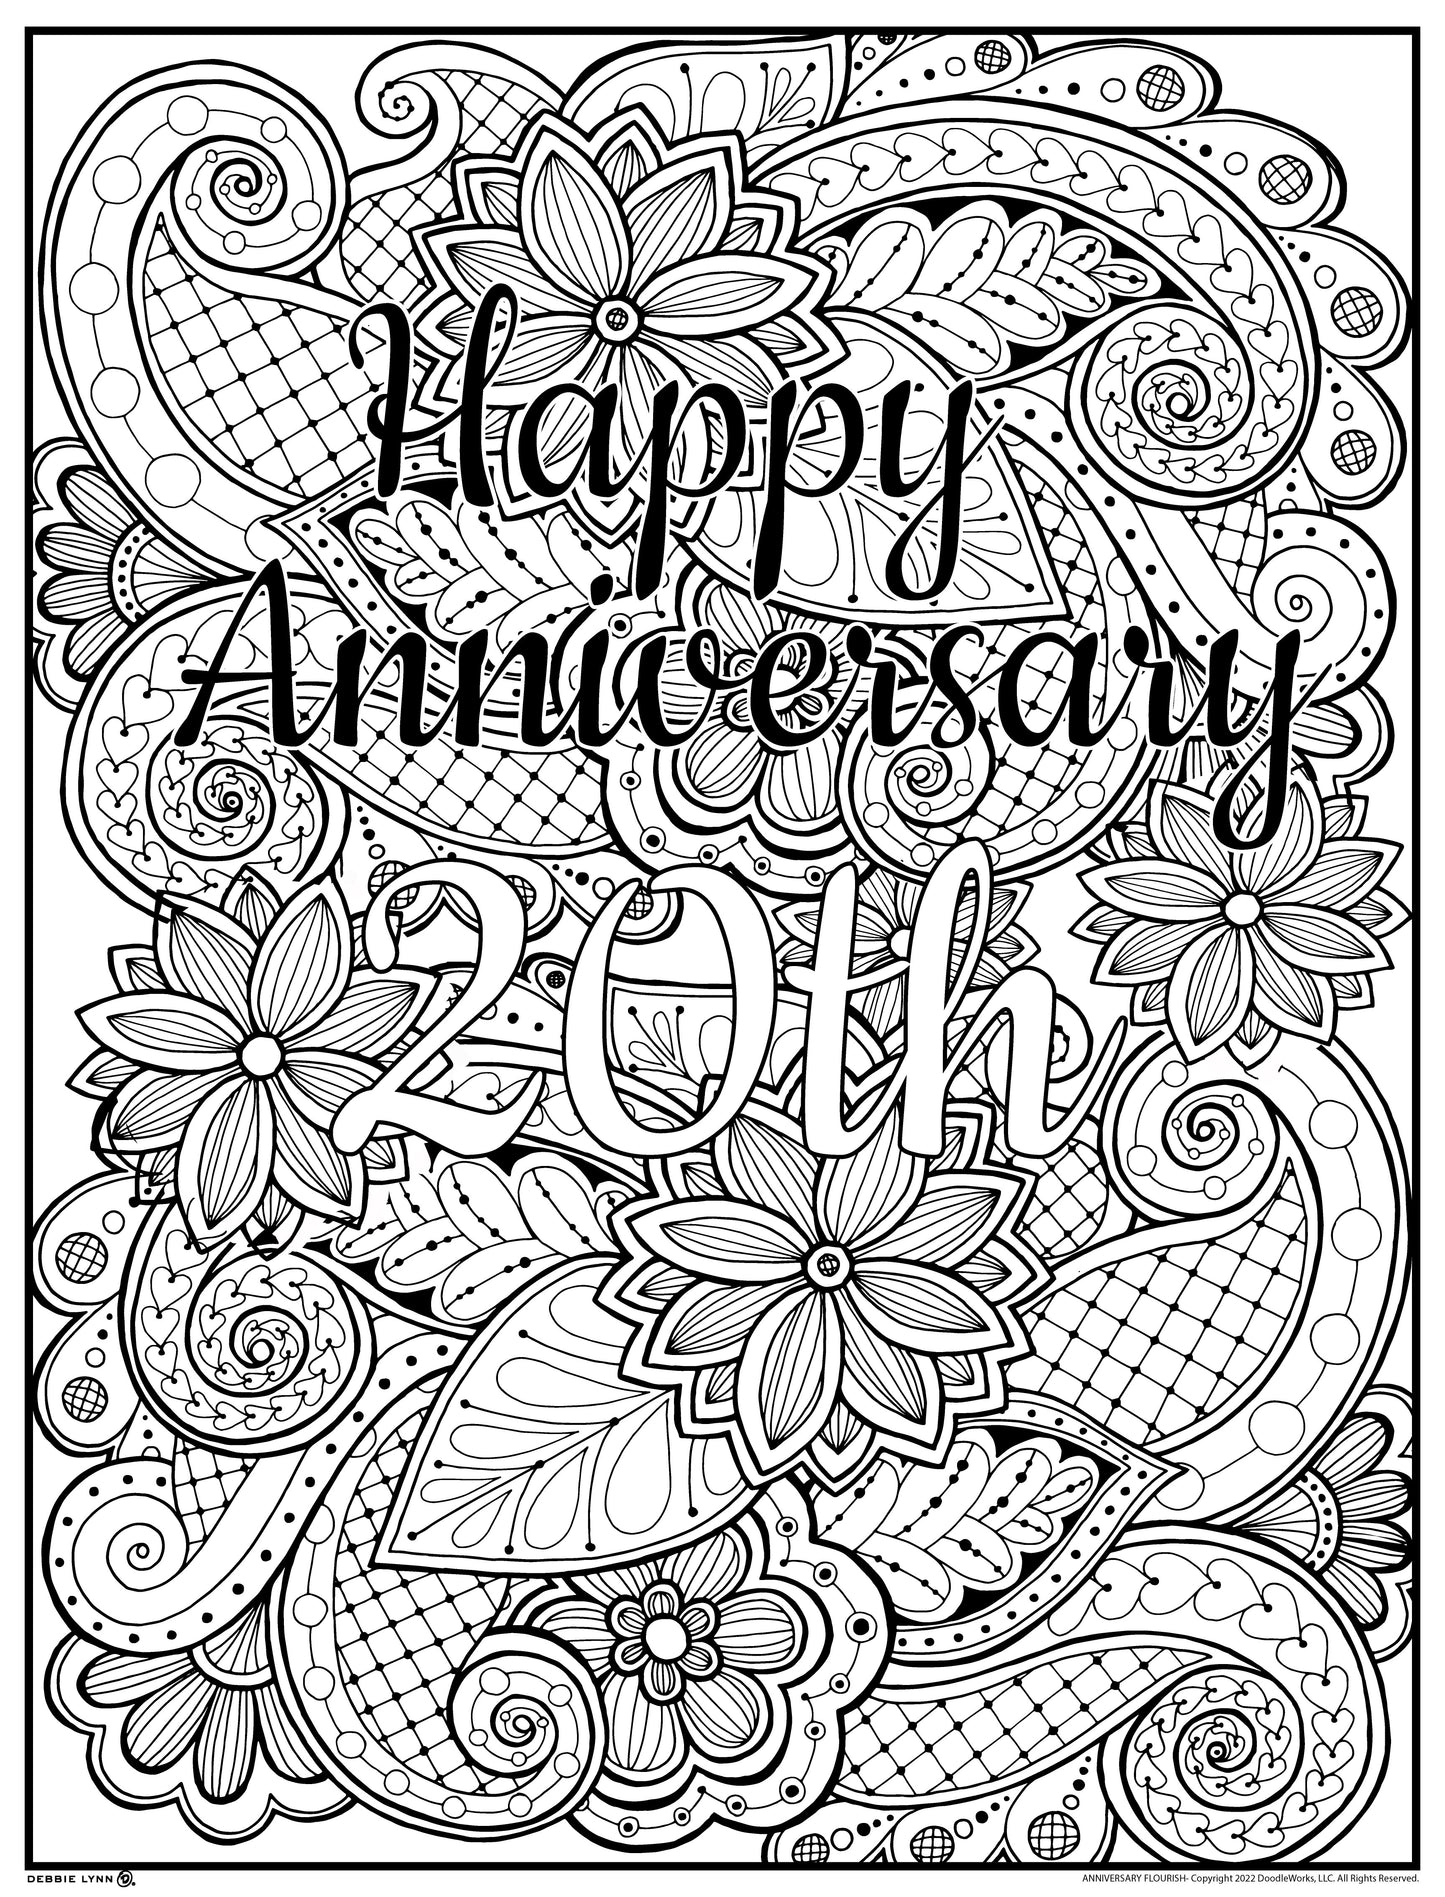 Anniversary Flourish Personalized Giant Coloring Poster 46"x60"